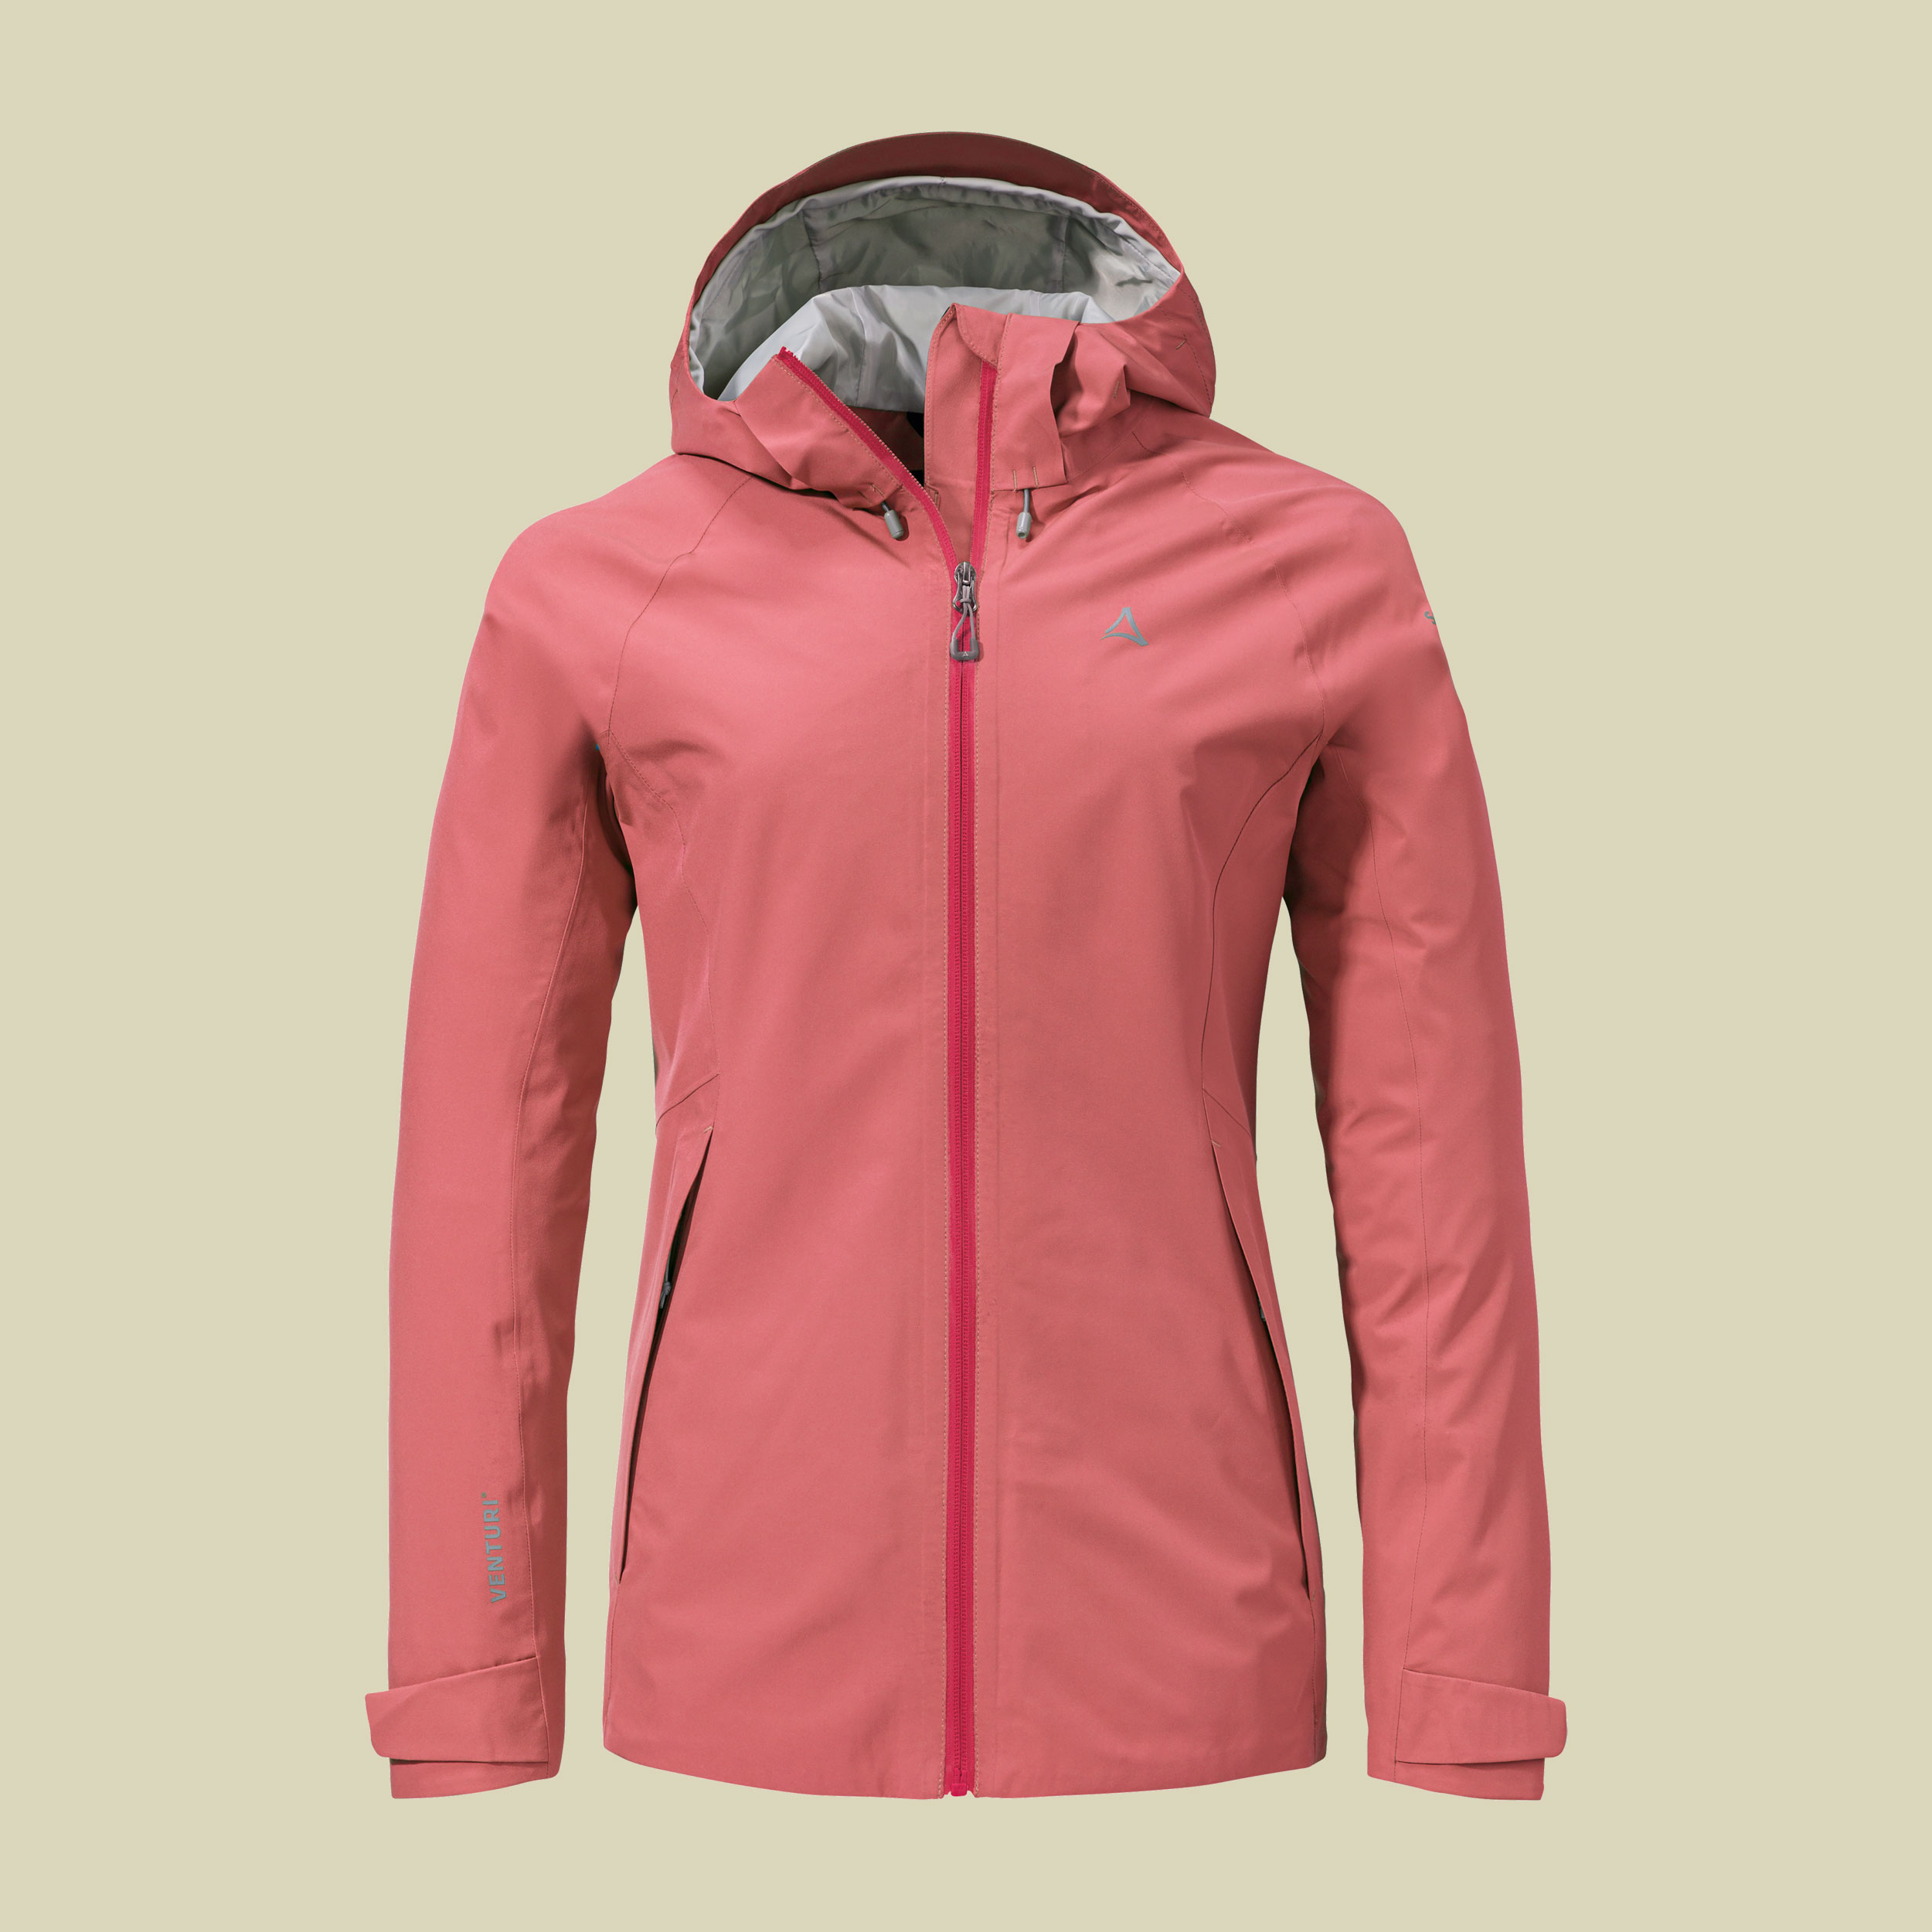 2L Jacket Ankelspitz L Women 38 pink - clasping rose